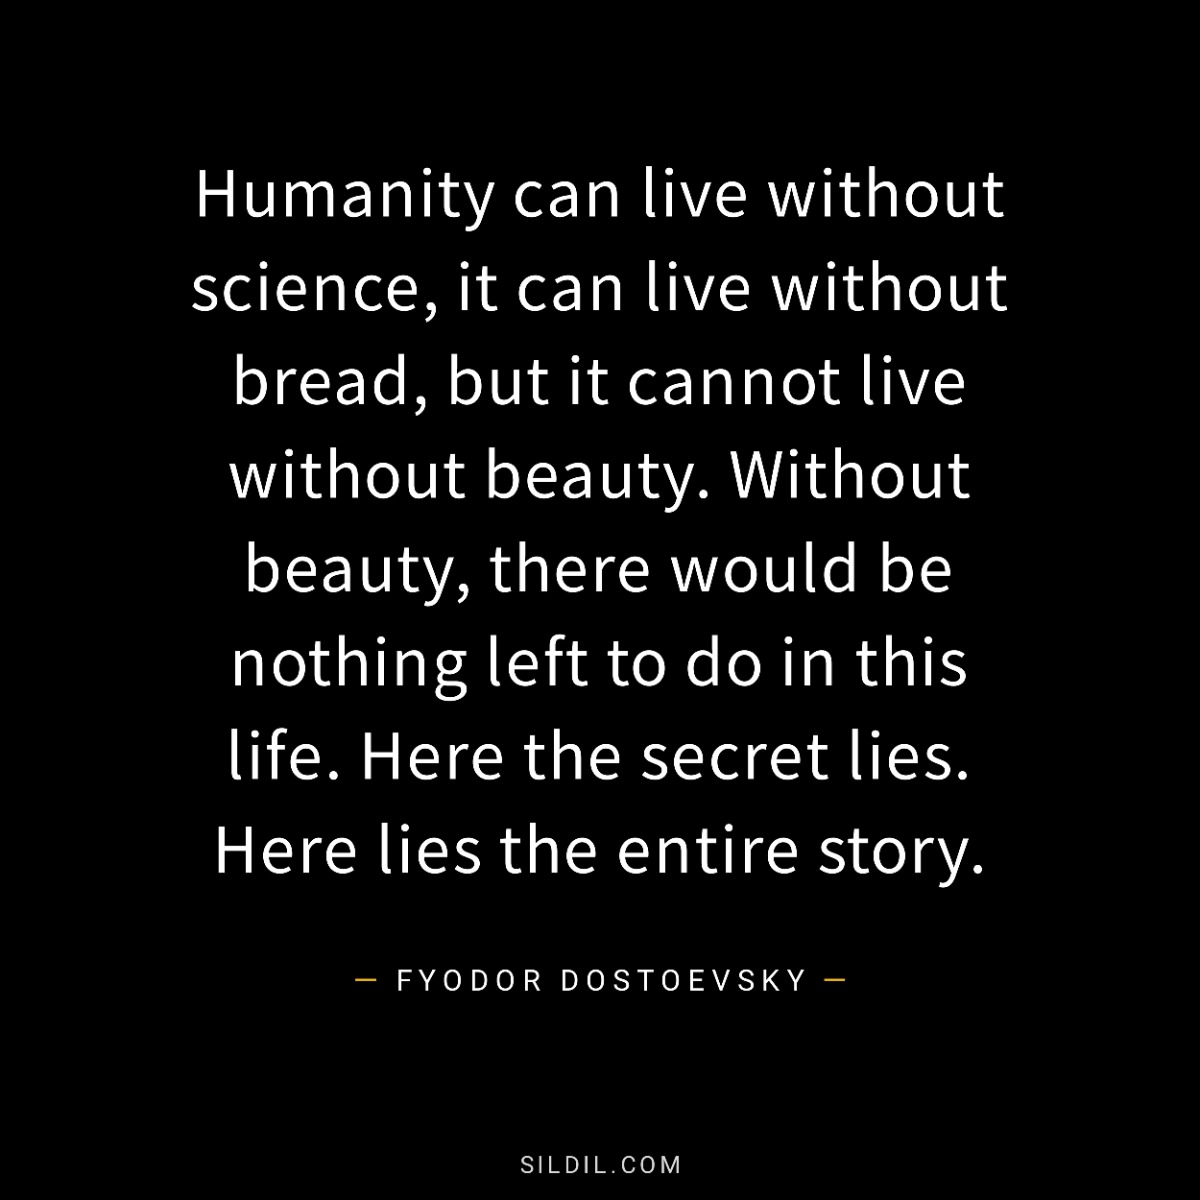 Humanity can live without science, it can live without bread, but it cannot live without beauty. Without beauty, there would be nothing left to do in this life. Here the secret lies. Here lies the entire story.